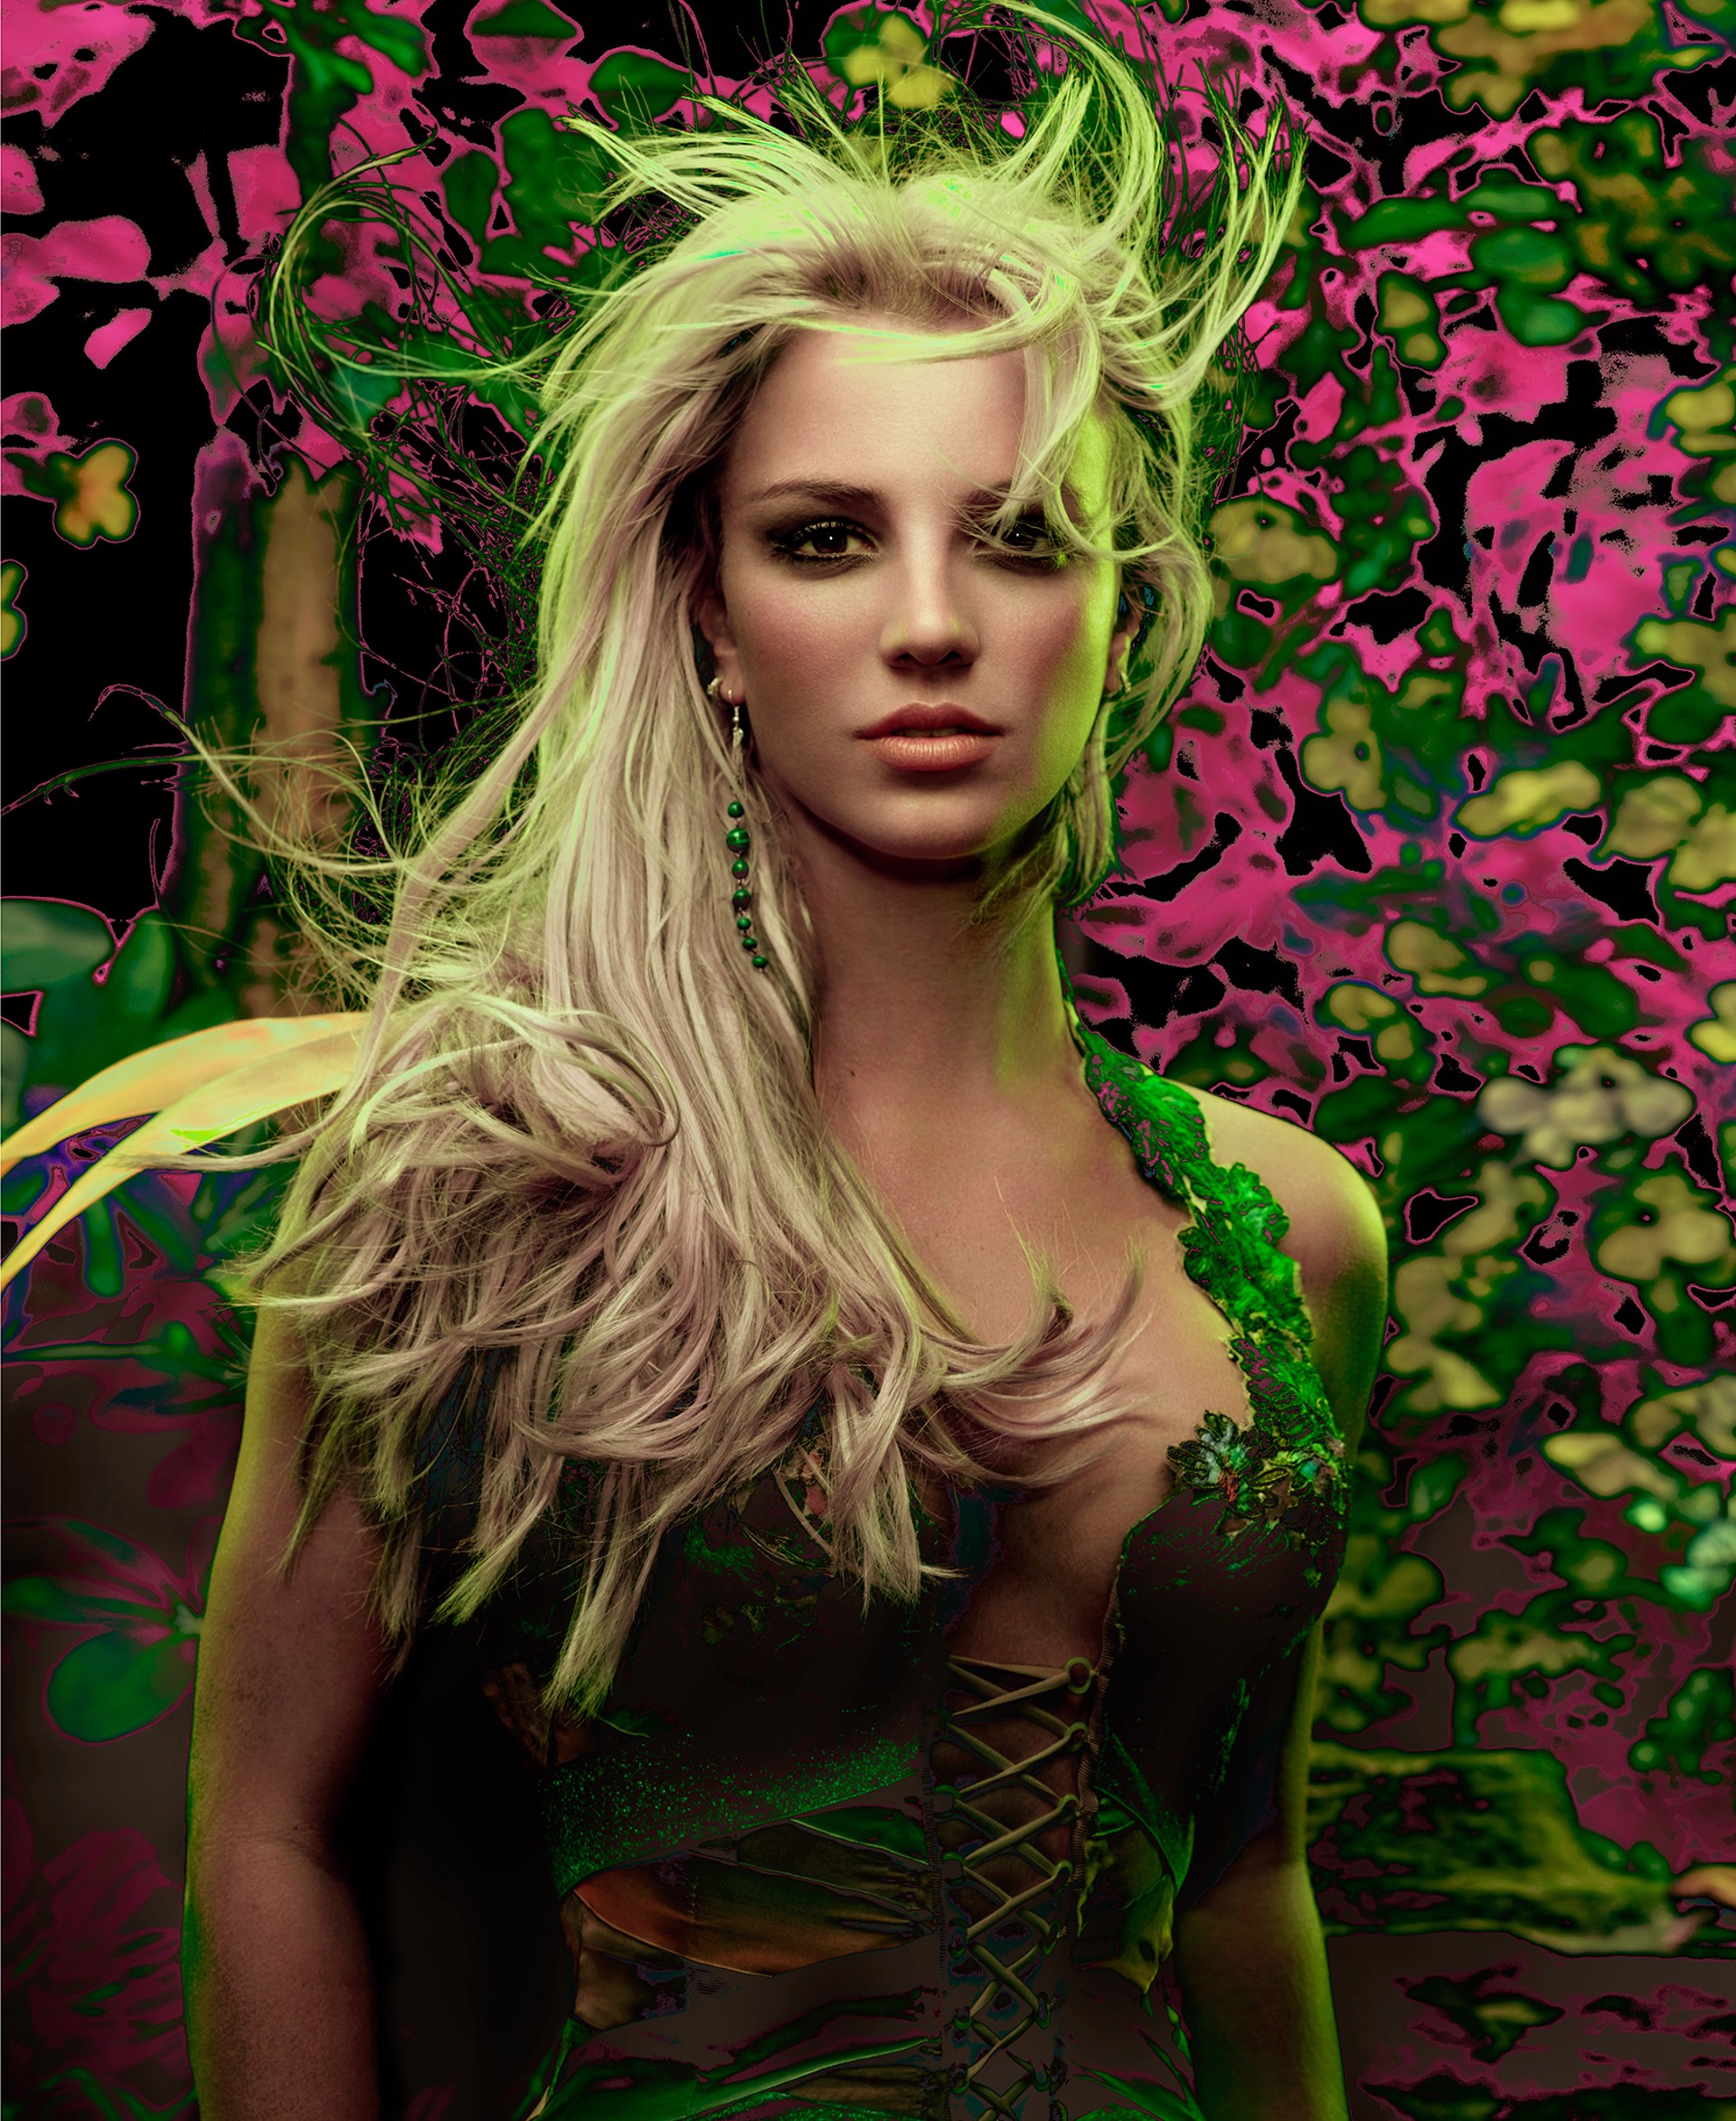 Britney, The Forest LARGE by Markus Klinko